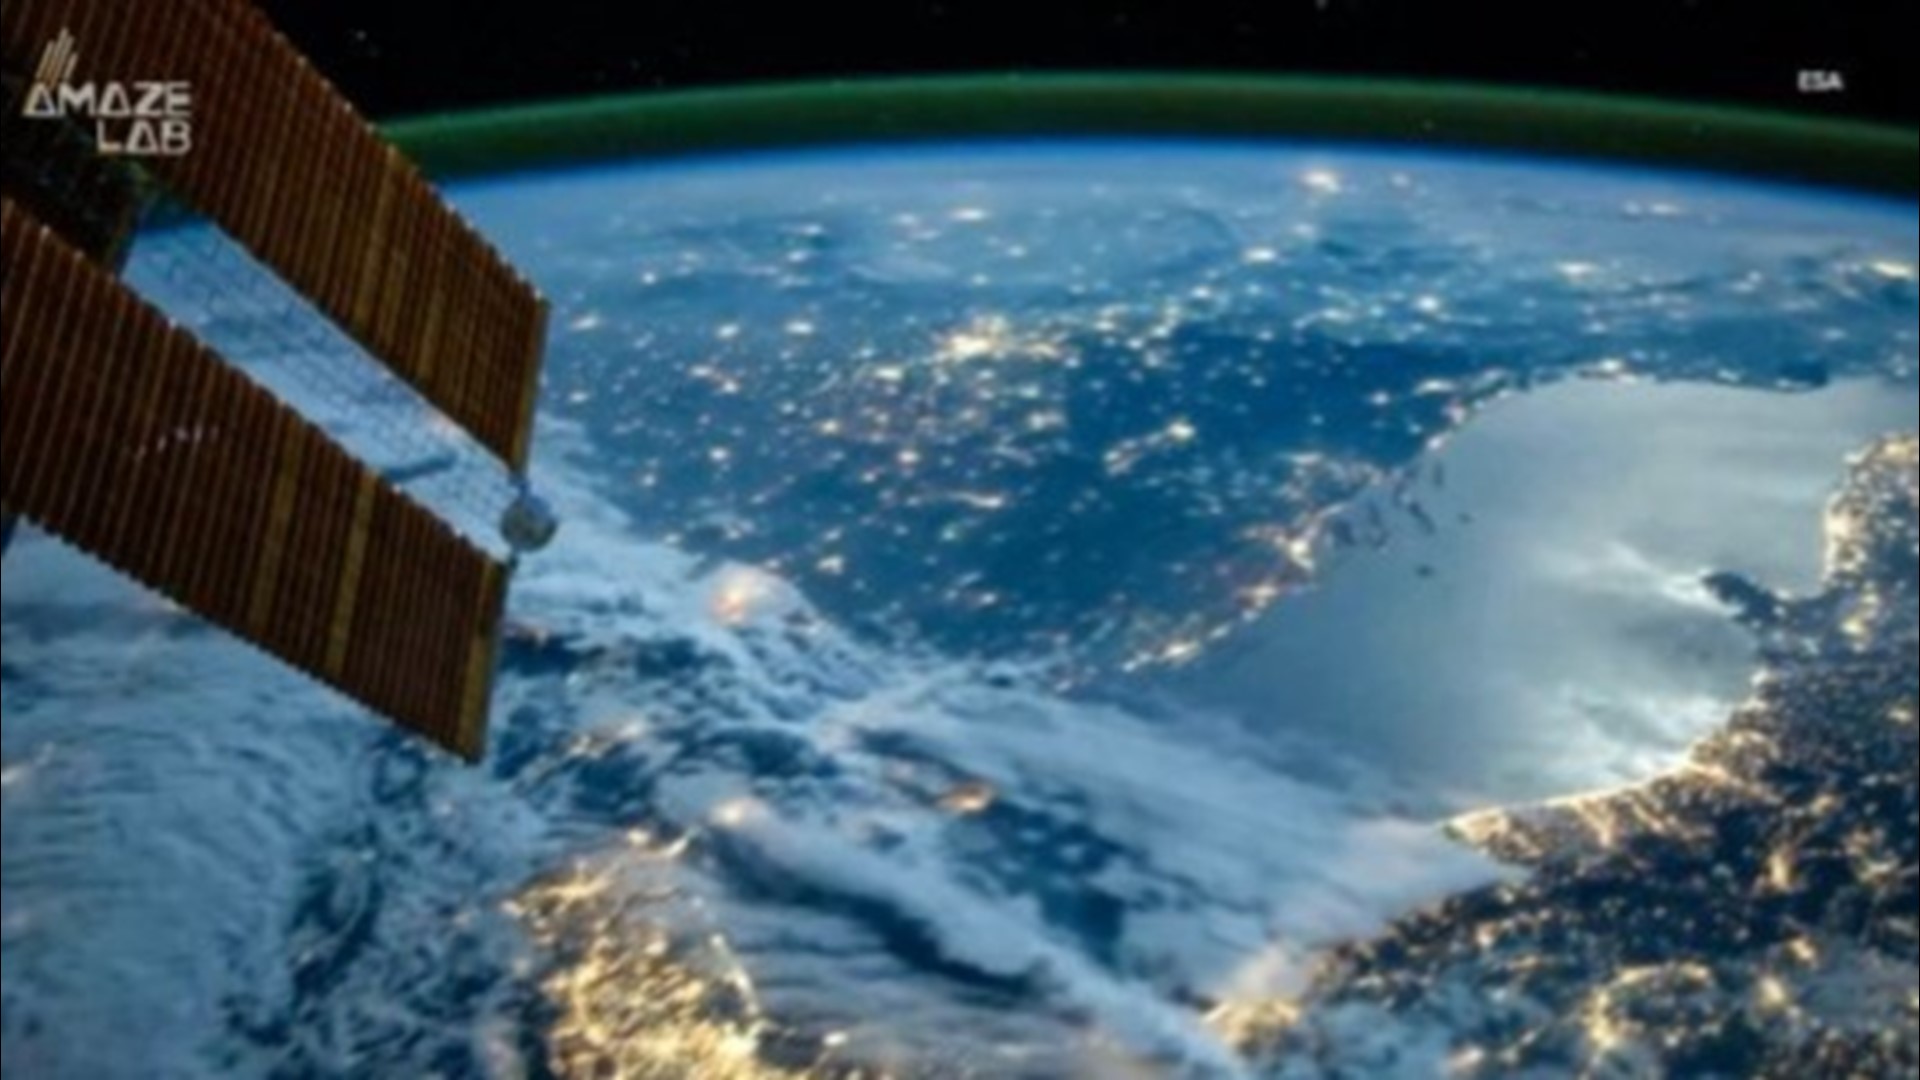 Get an astronaut's view of auroras, stars, and the Milky Way surrounding our beautiful planet. 12,500 images taken by European Space Agency astronaut Alexander Gerst were combined to create the incredible timelapses of Earth from the International Space Station.